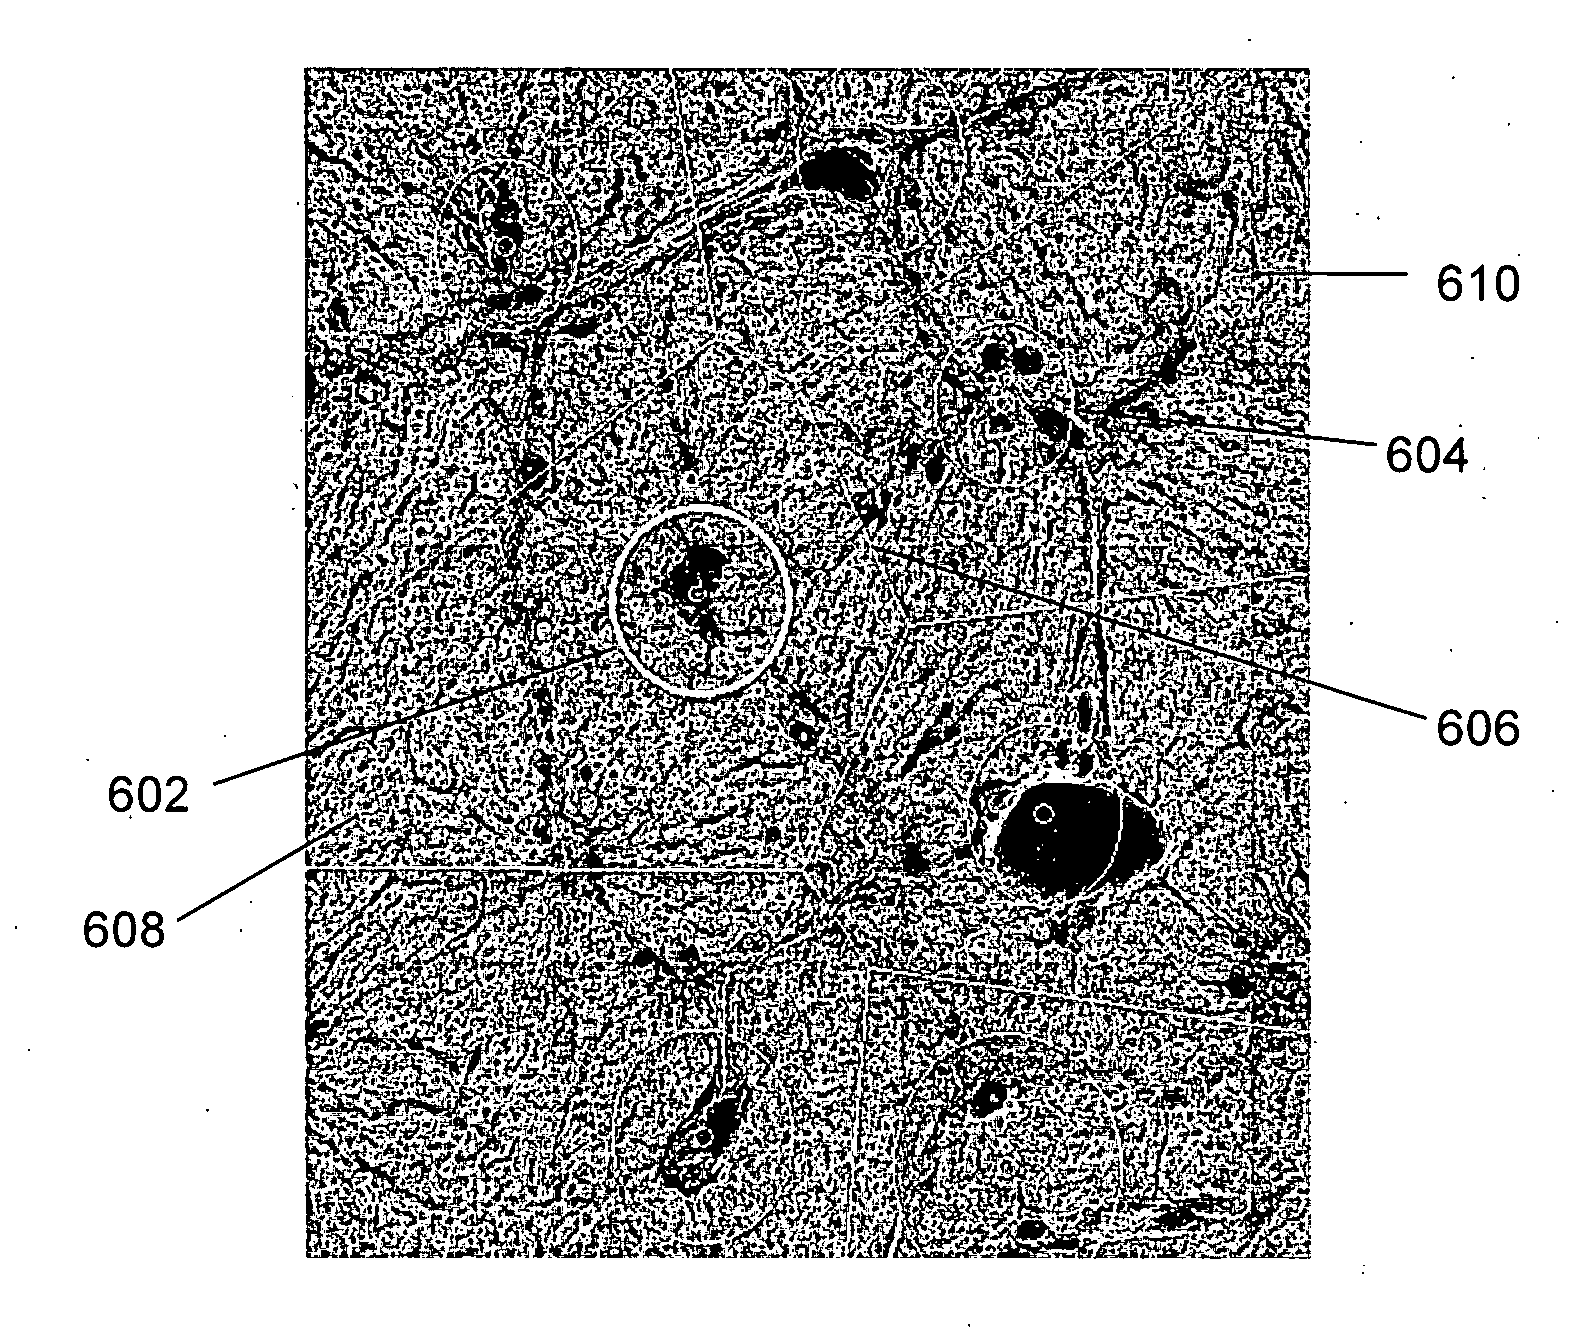 Method and system for determining a stage of fibrosis in a liver